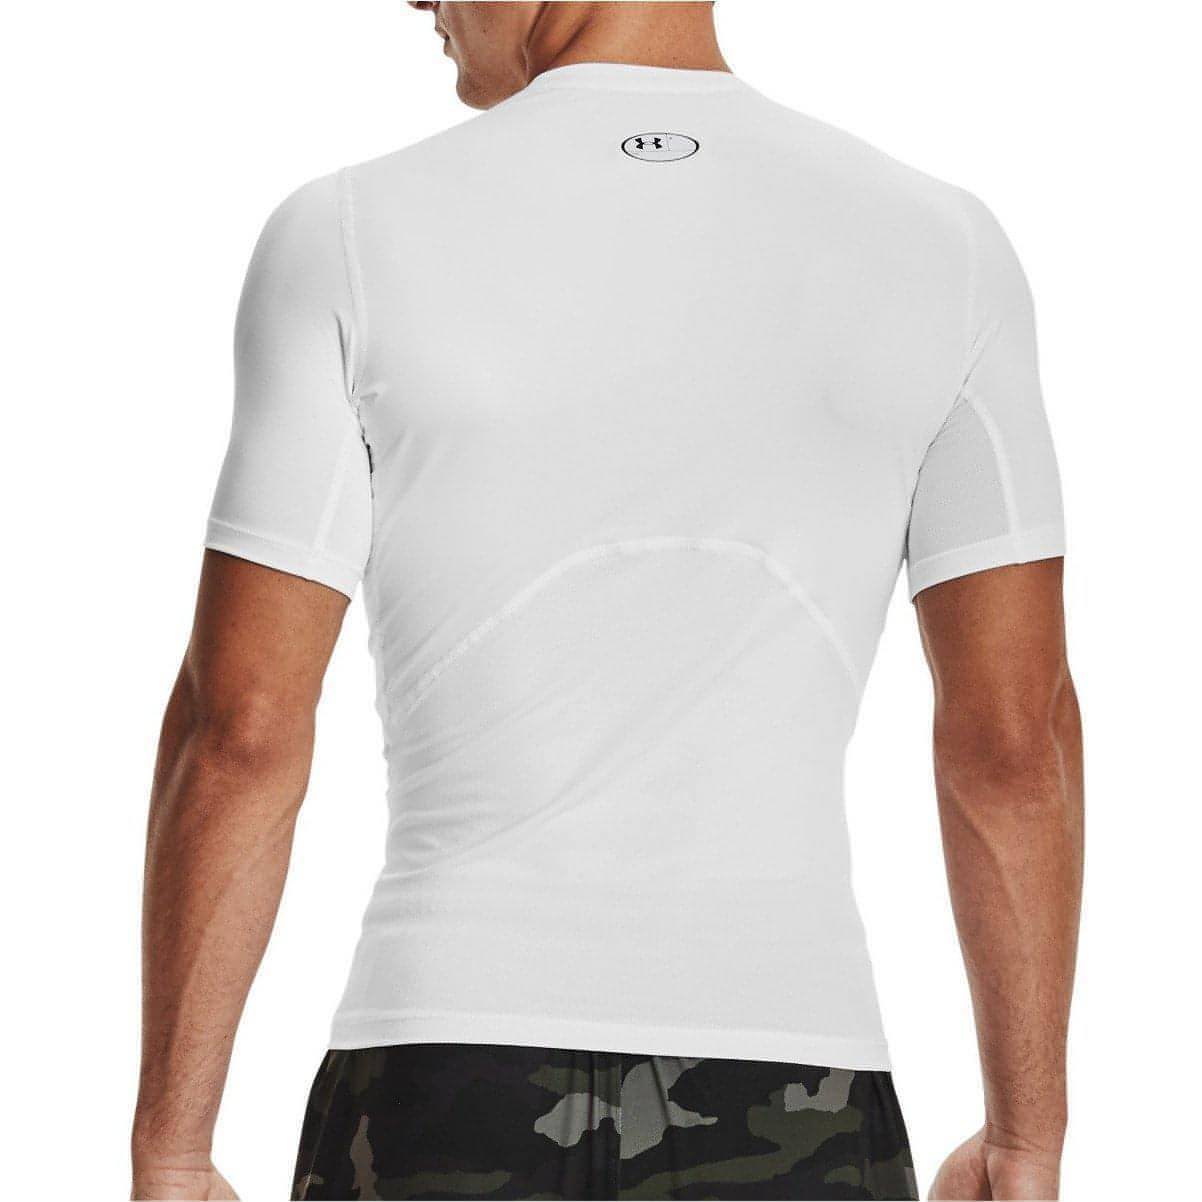 Under Armour HeatGear Armour Short Sleeve Mens Compression Top - White - Start Fitness